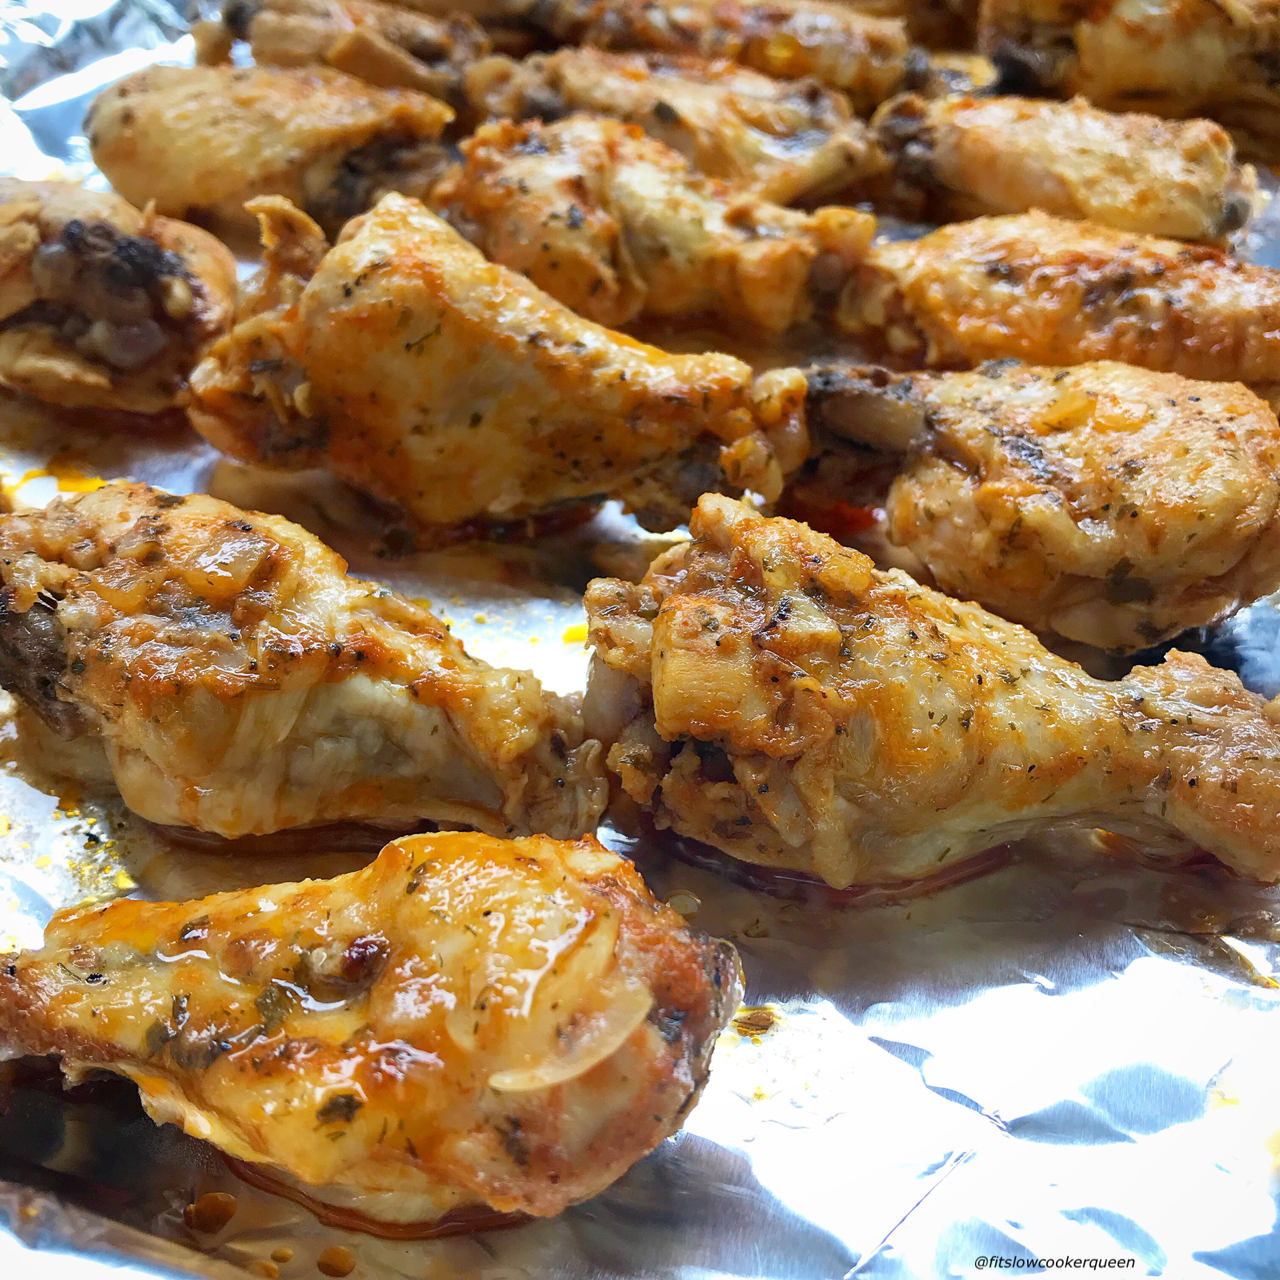 Here are healthy slow cooker buffalo chicken wings that are lactose-free, paleo, whole30, and use a homemade ranch mix! Serve these wings at your next game-day gathering, potluck or weekday snack.